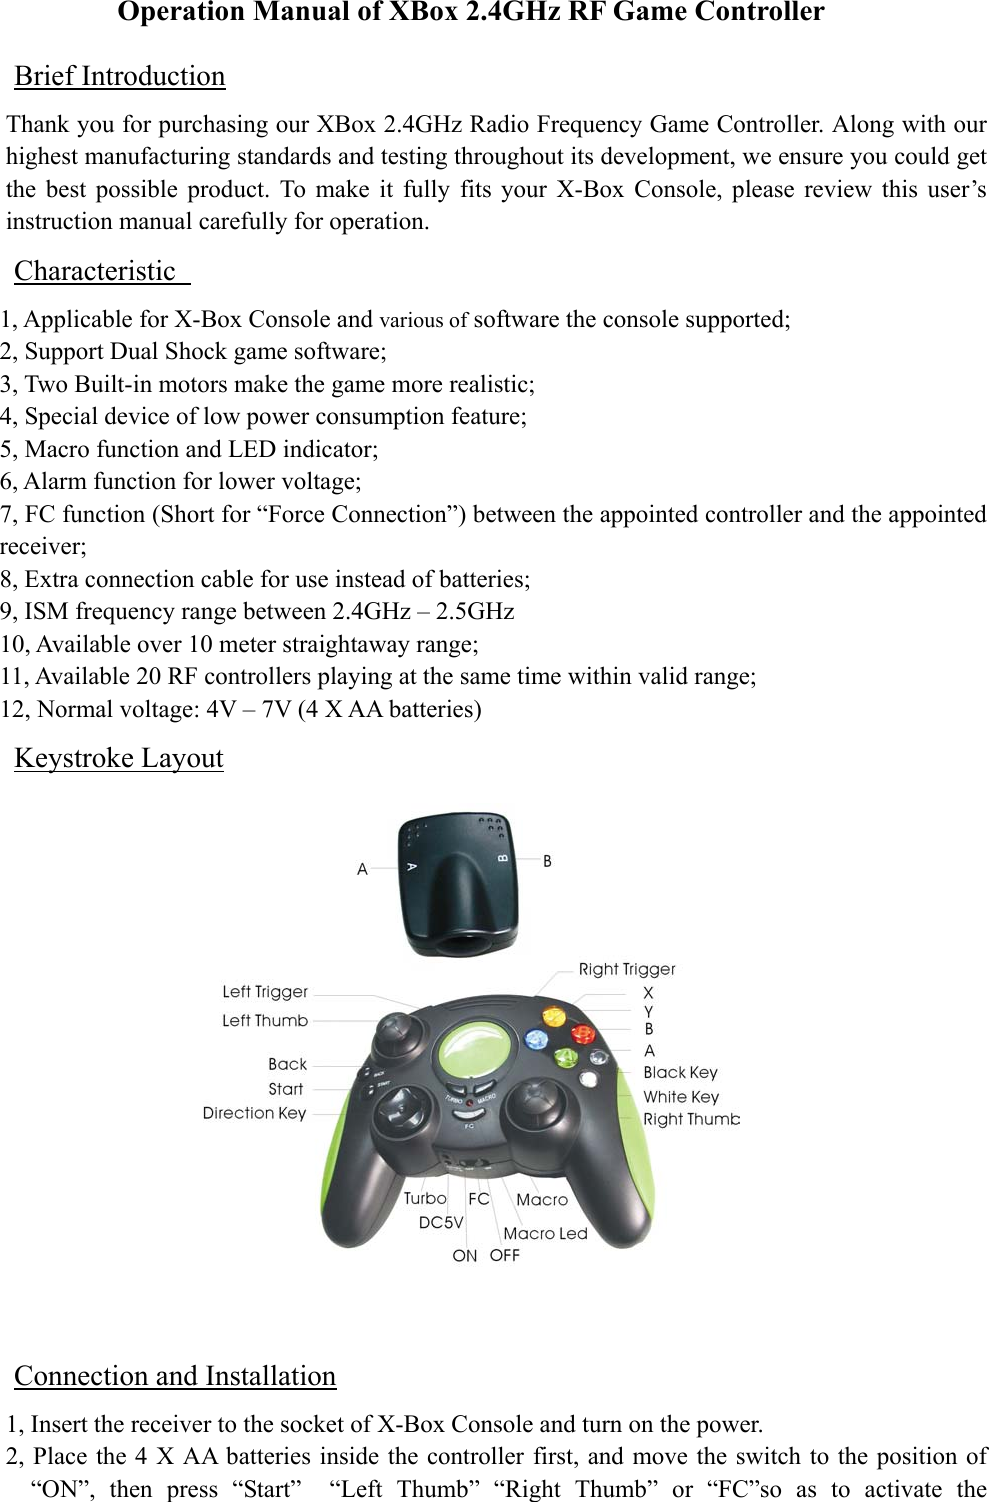 Operation Manual of XBox 2.4GHz RF Game Controller Brief Introduction Thank you for purchasing our XBox 2.4GHz Radio Frequency Game Controller. Along with our highest manufacturing standards and testing throughout its development, we ensure you could get the best possible product. To make it fully fits your X-Box Console, please review this user’s instruction manual carefully for operation.   Characteristic   1, Applicable for X-Box Console and various of software the console supported; 2, Support Dual Shock game software; 3, Two Built-in motors make the game more realistic; 4, Special device of low power consumption feature;   5, Macro function and LED indicator; 6, Alarm function for lower voltage; 7, FC function (Short for “Force Connection”) between the appointed controller and the appointed receiver; 8, Extra connection cable for use instead of batteries; 9, ISM frequency range between 2.4GHz – 2.5GHz 10, Available over 10 meter straightaway range; 11, Available 20 RF controllers playing at the same time within valid range; 12, Normal voltage: 4V – 7V (4 X AA batteries) Keystroke Layout  Connection and Installation 1, Insert the receiver to the socket of X-Box Console and turn on the power. 2, Place the 4 X AA batteries inside the controller first, and move the switch to the position of “ON”, then press “Start”  “Left Thumb” “Right Thumb” or “FC”so as to activate the 